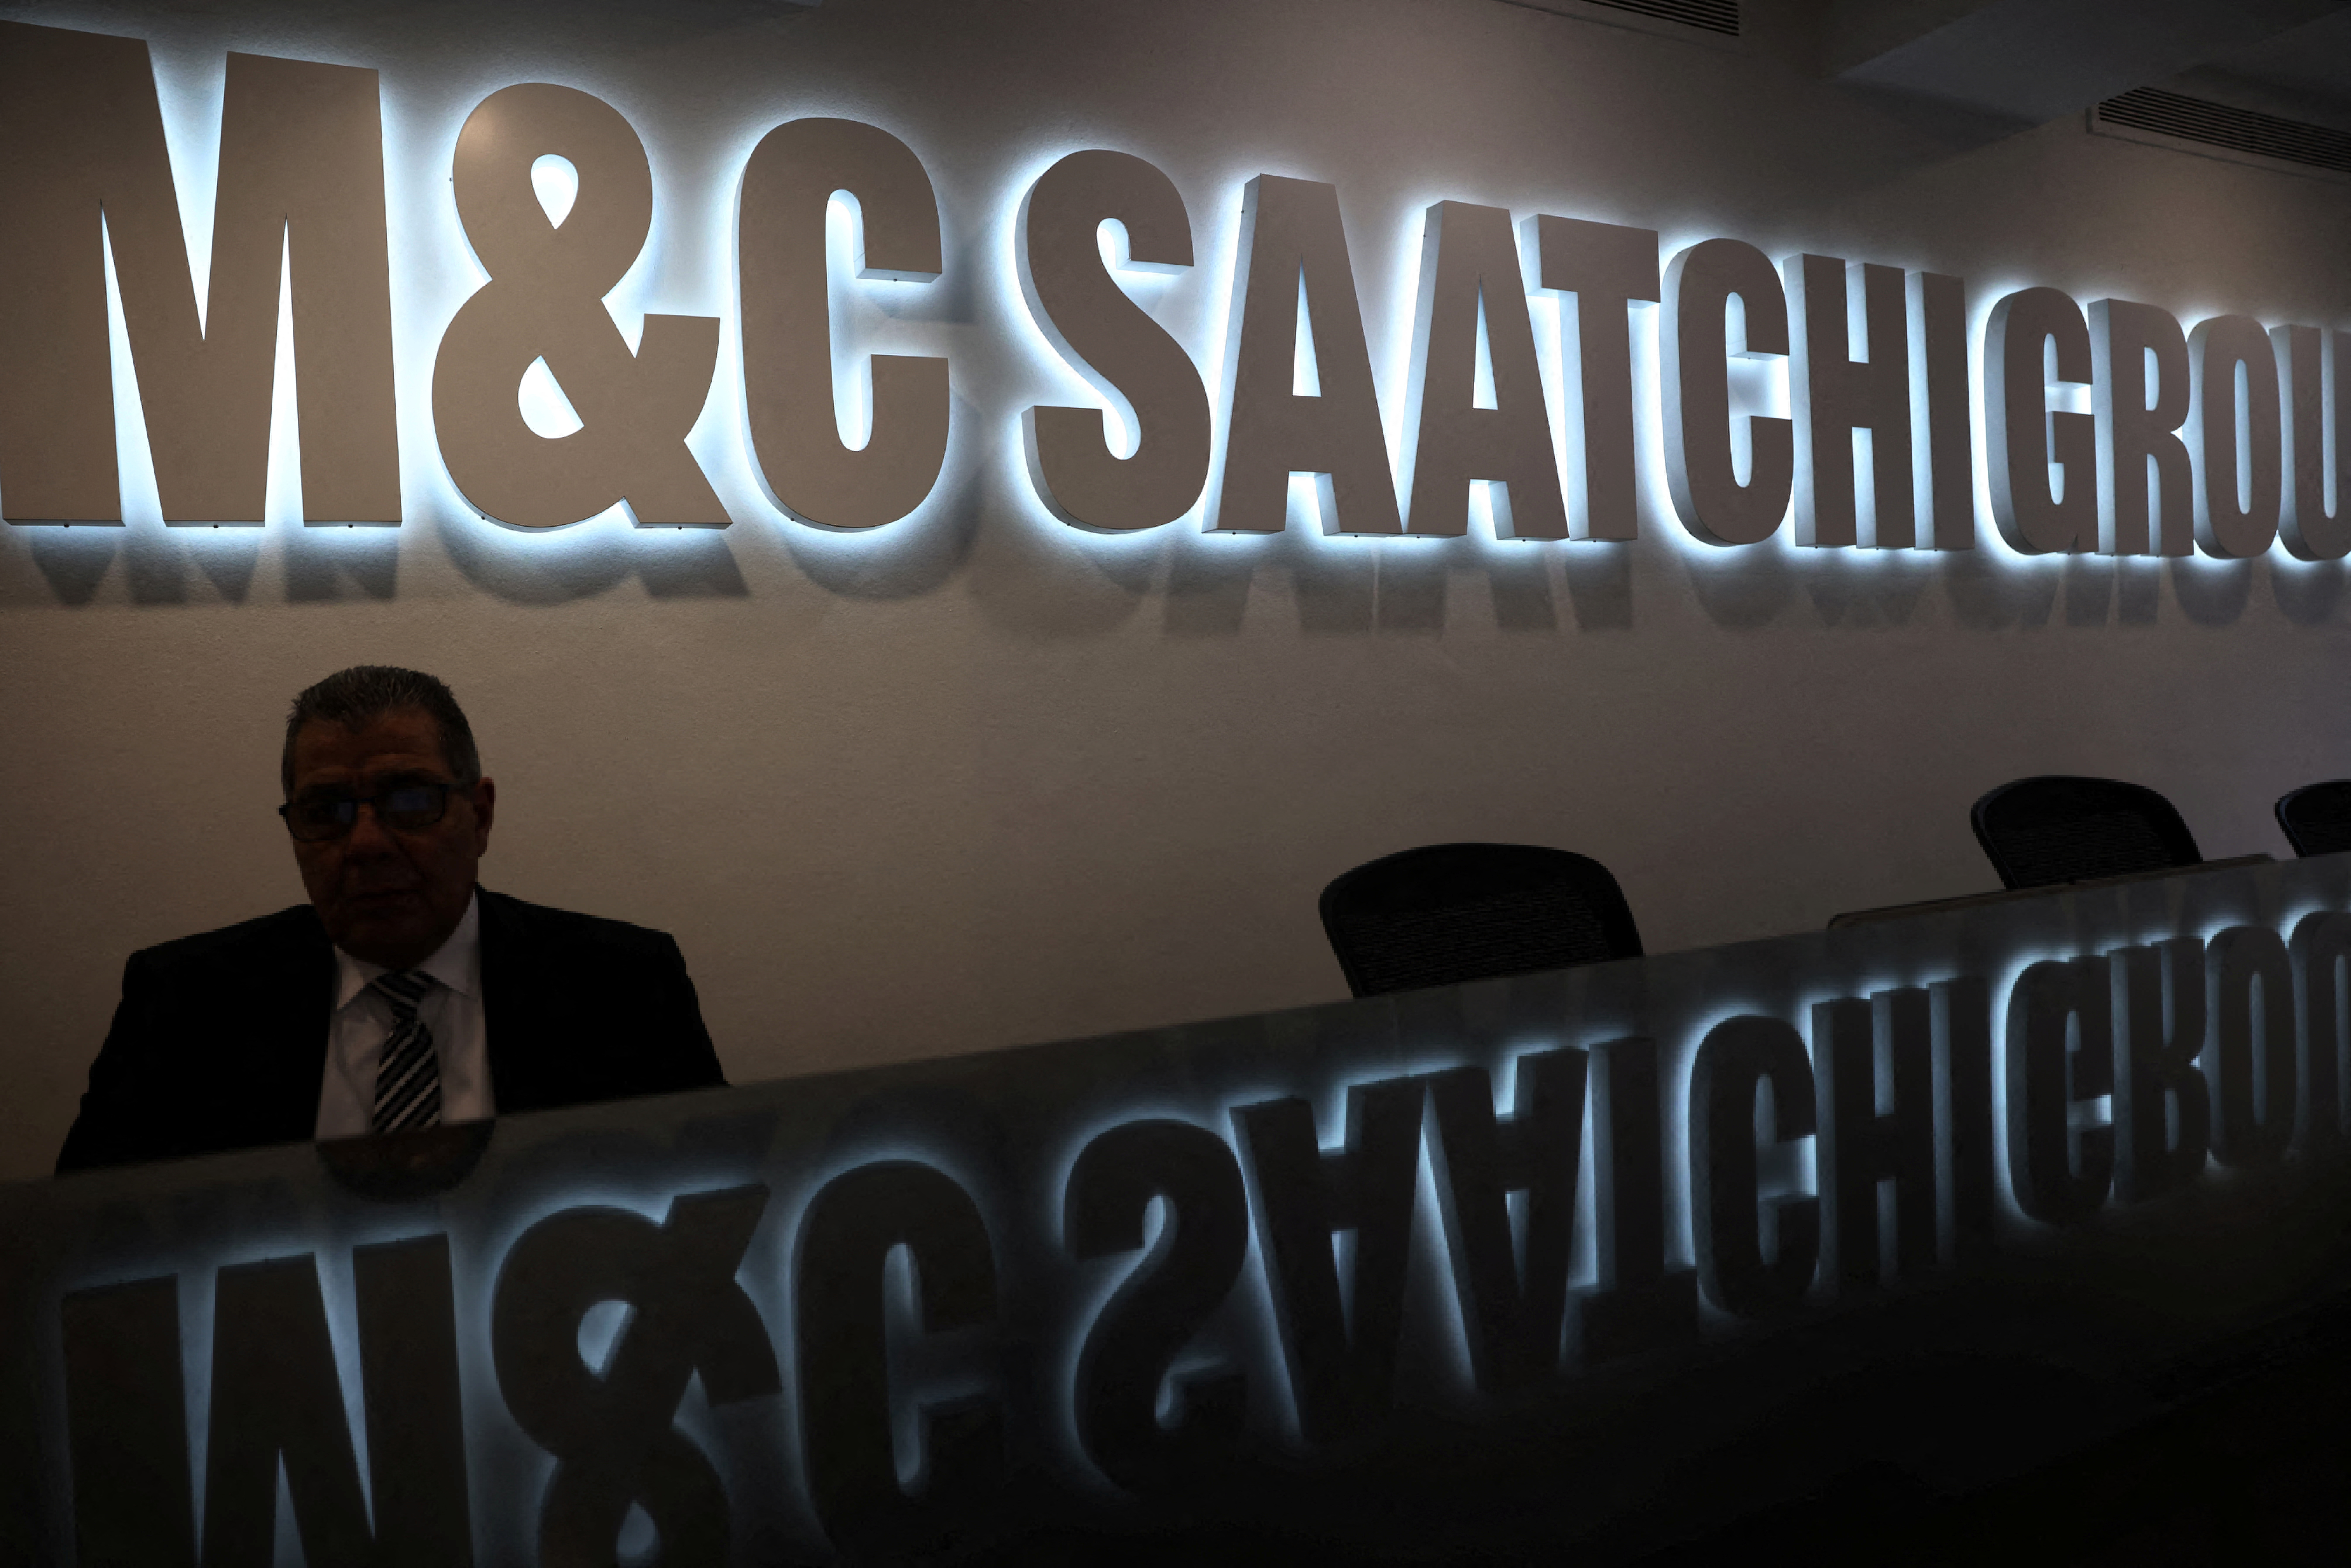 Signage is seen at the reception of the M&C Saatchi office in central London, Britain, January 6, 2022. REUTERS/Henry Nicholls